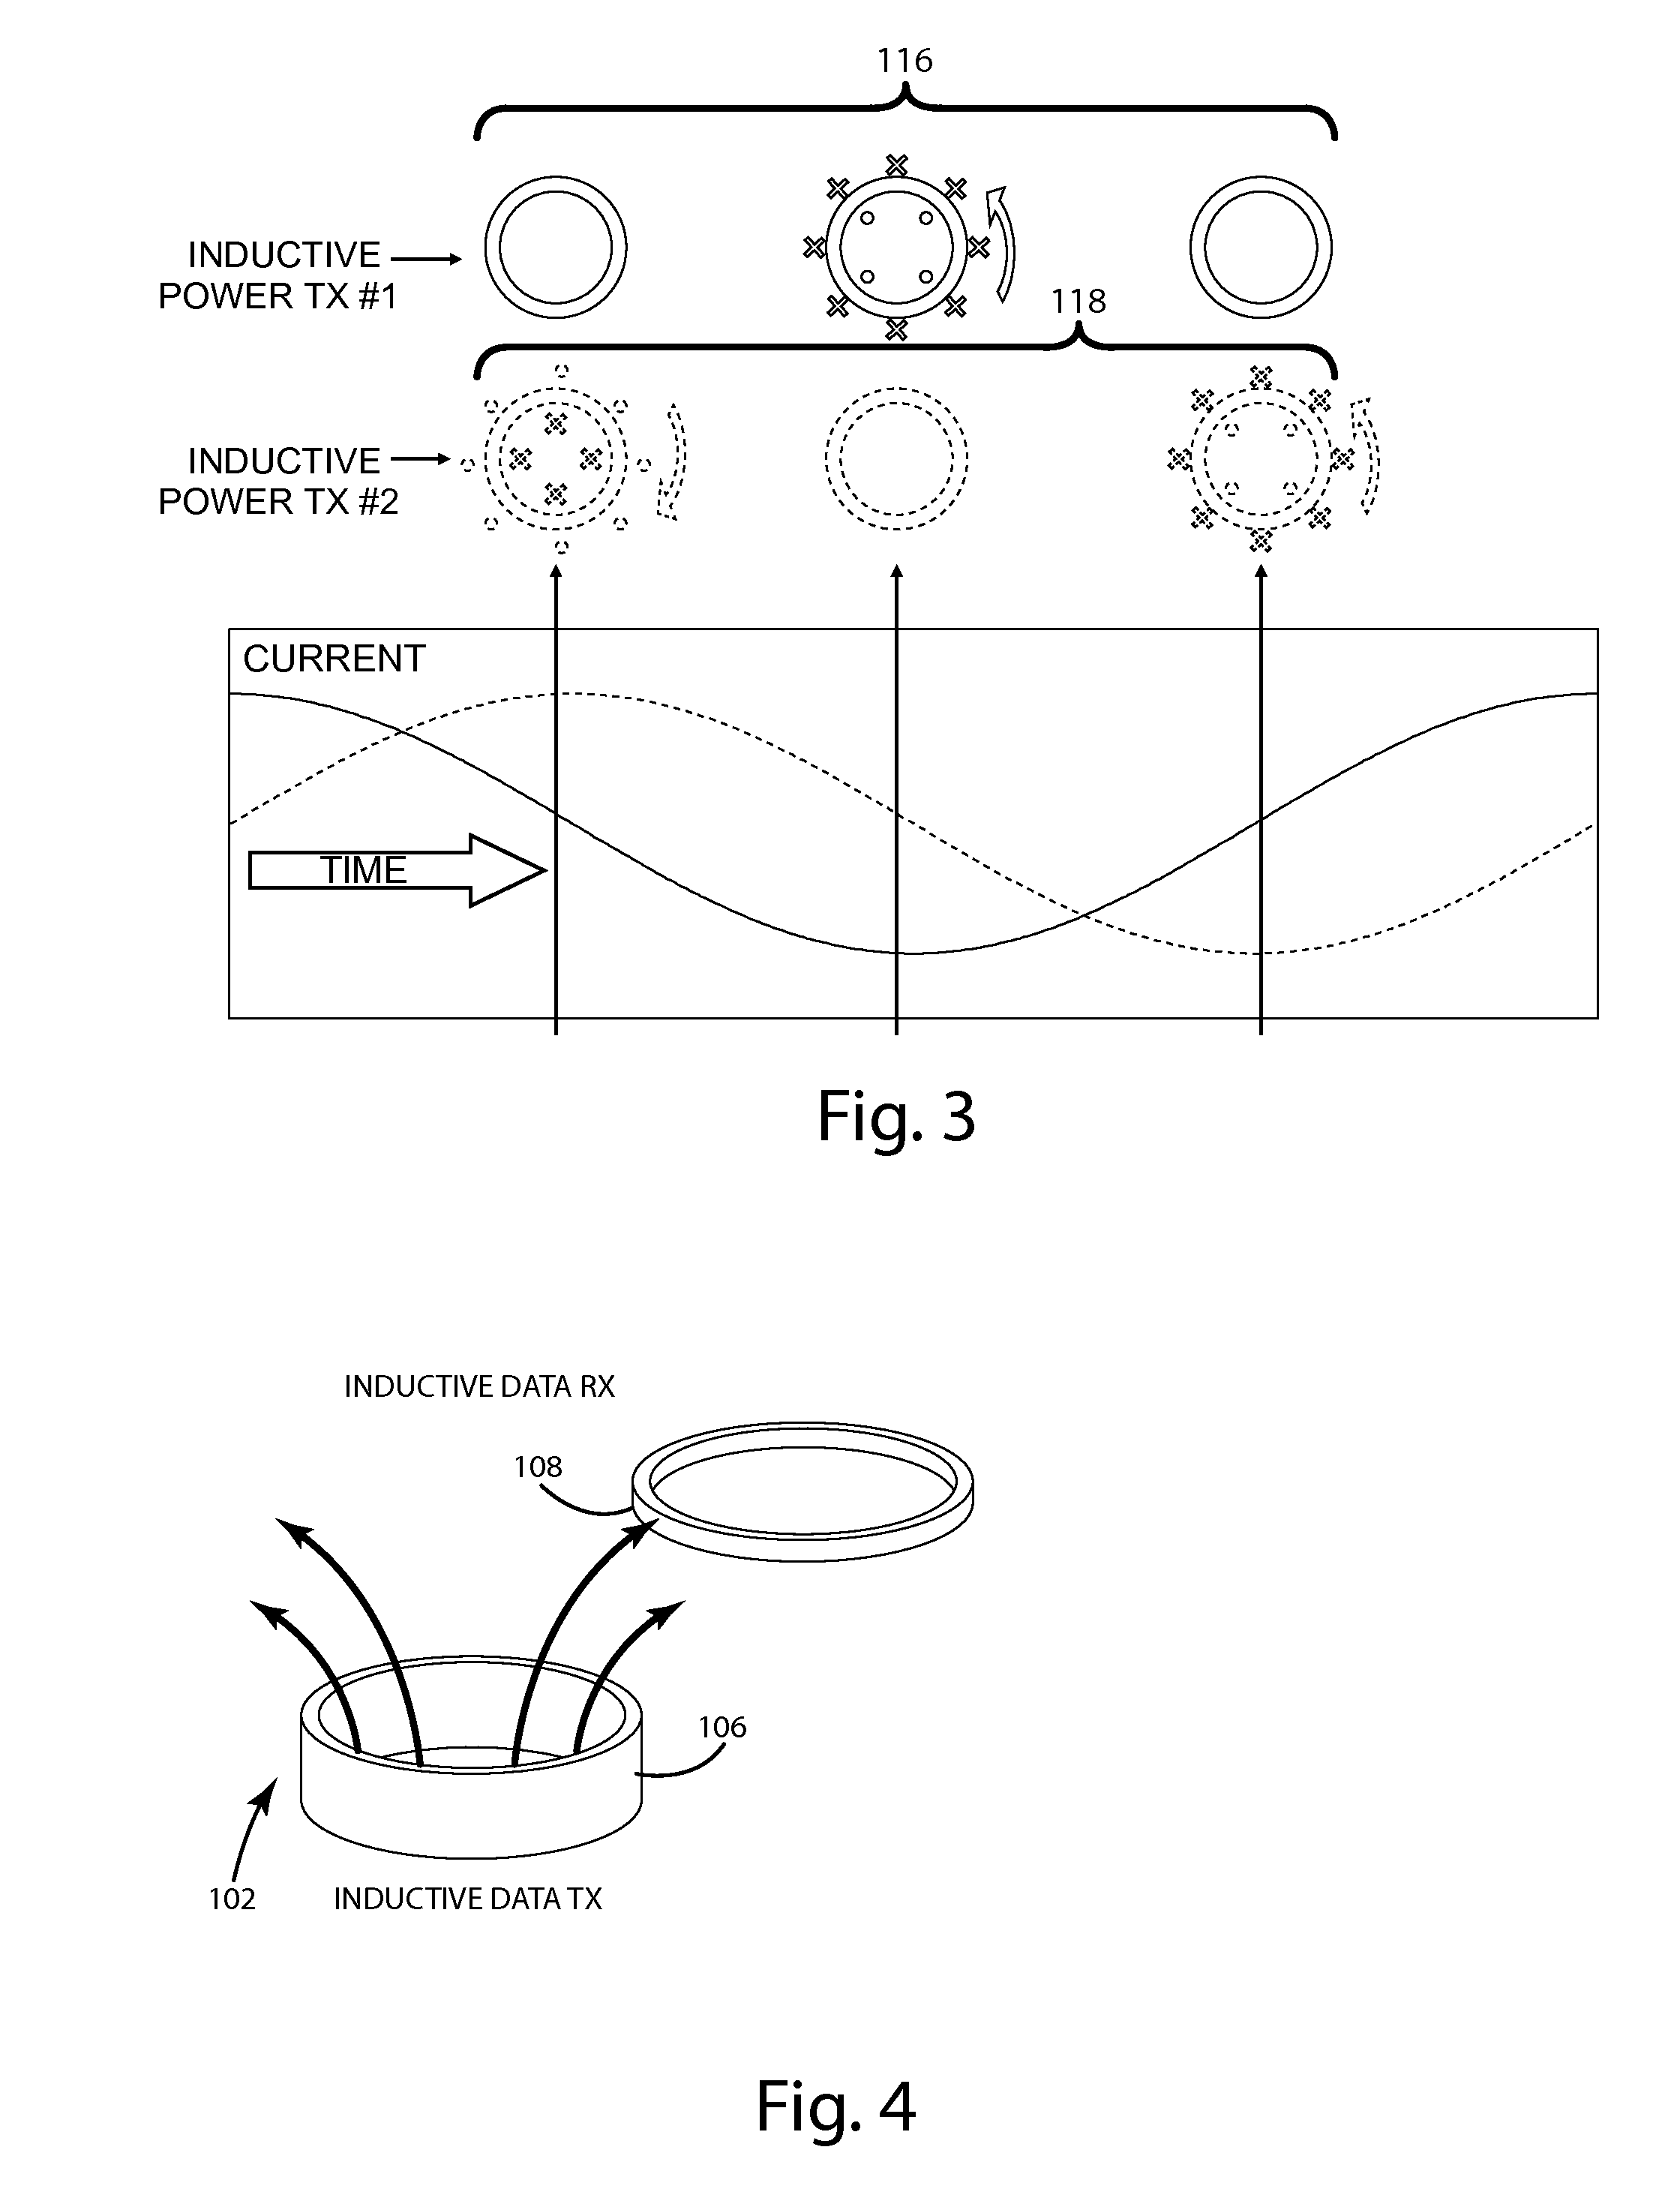 Interference mitigation for multiple inductive systems